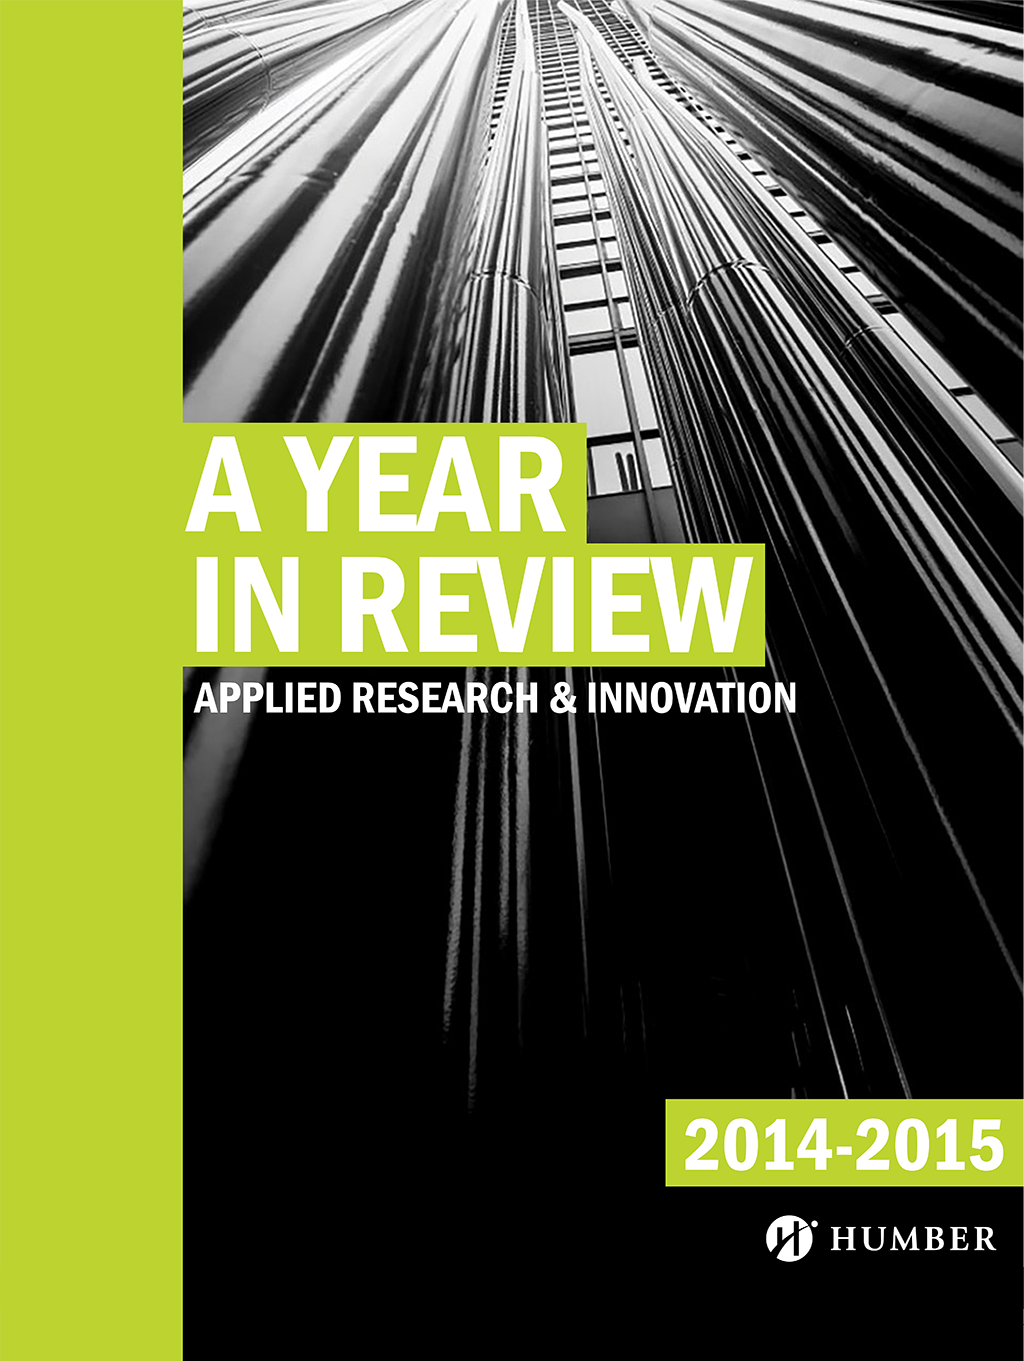 2014-2015 Annual Report cover - looking up at very tall office towers from the ground